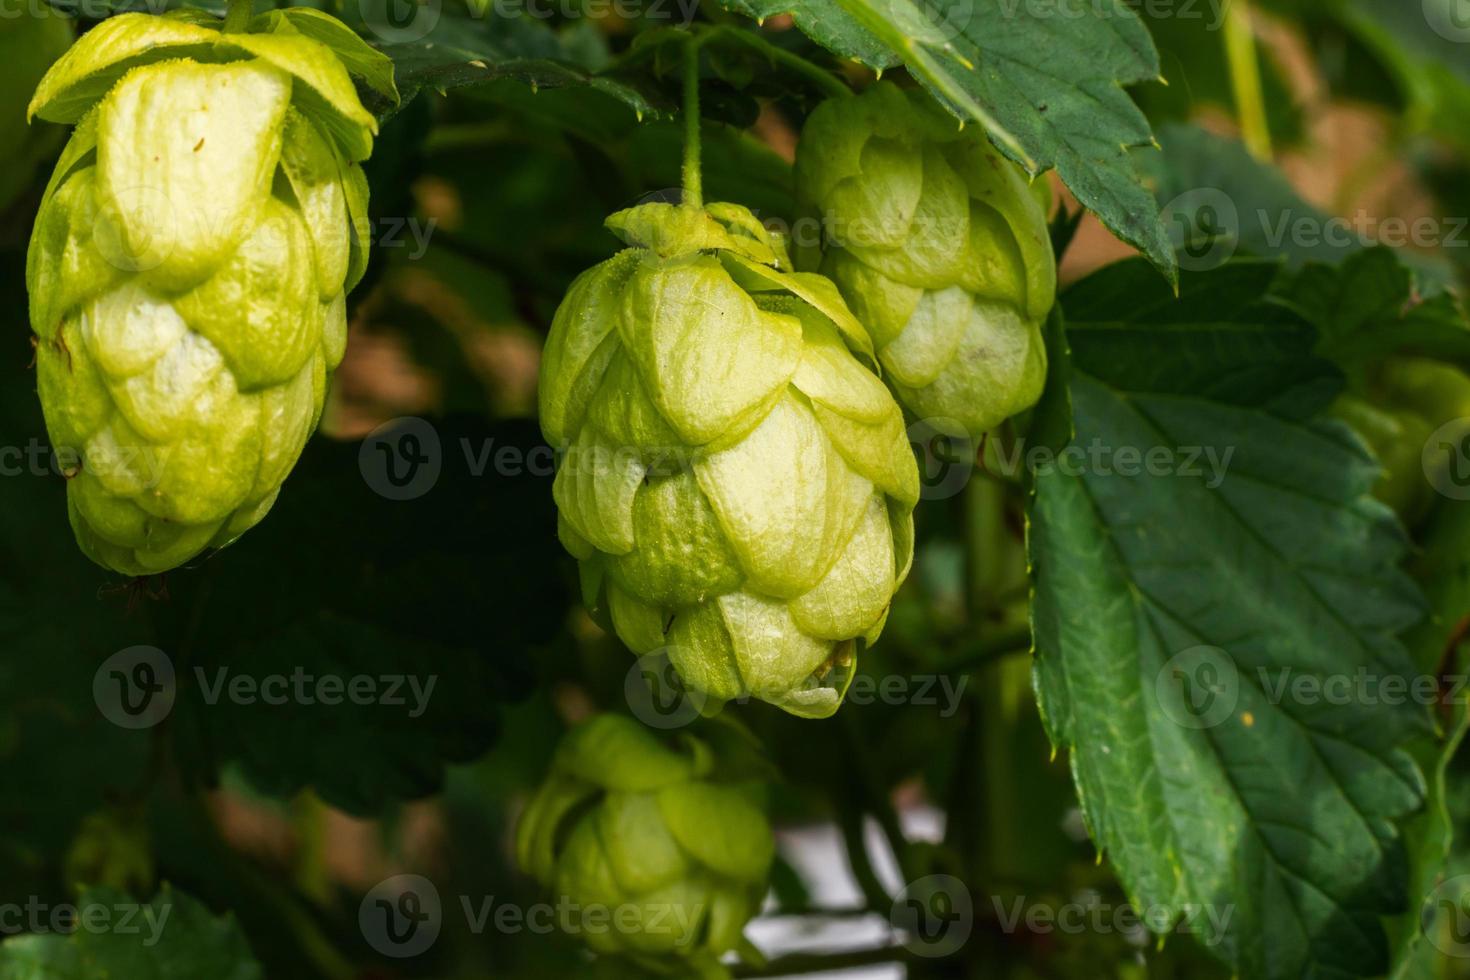 Farming and agriculture concept. Green fresh ripe organic hop cones for making beer and bread, close up. Fresh hops for brewing production. Hop plant growing in garden or farm. photo